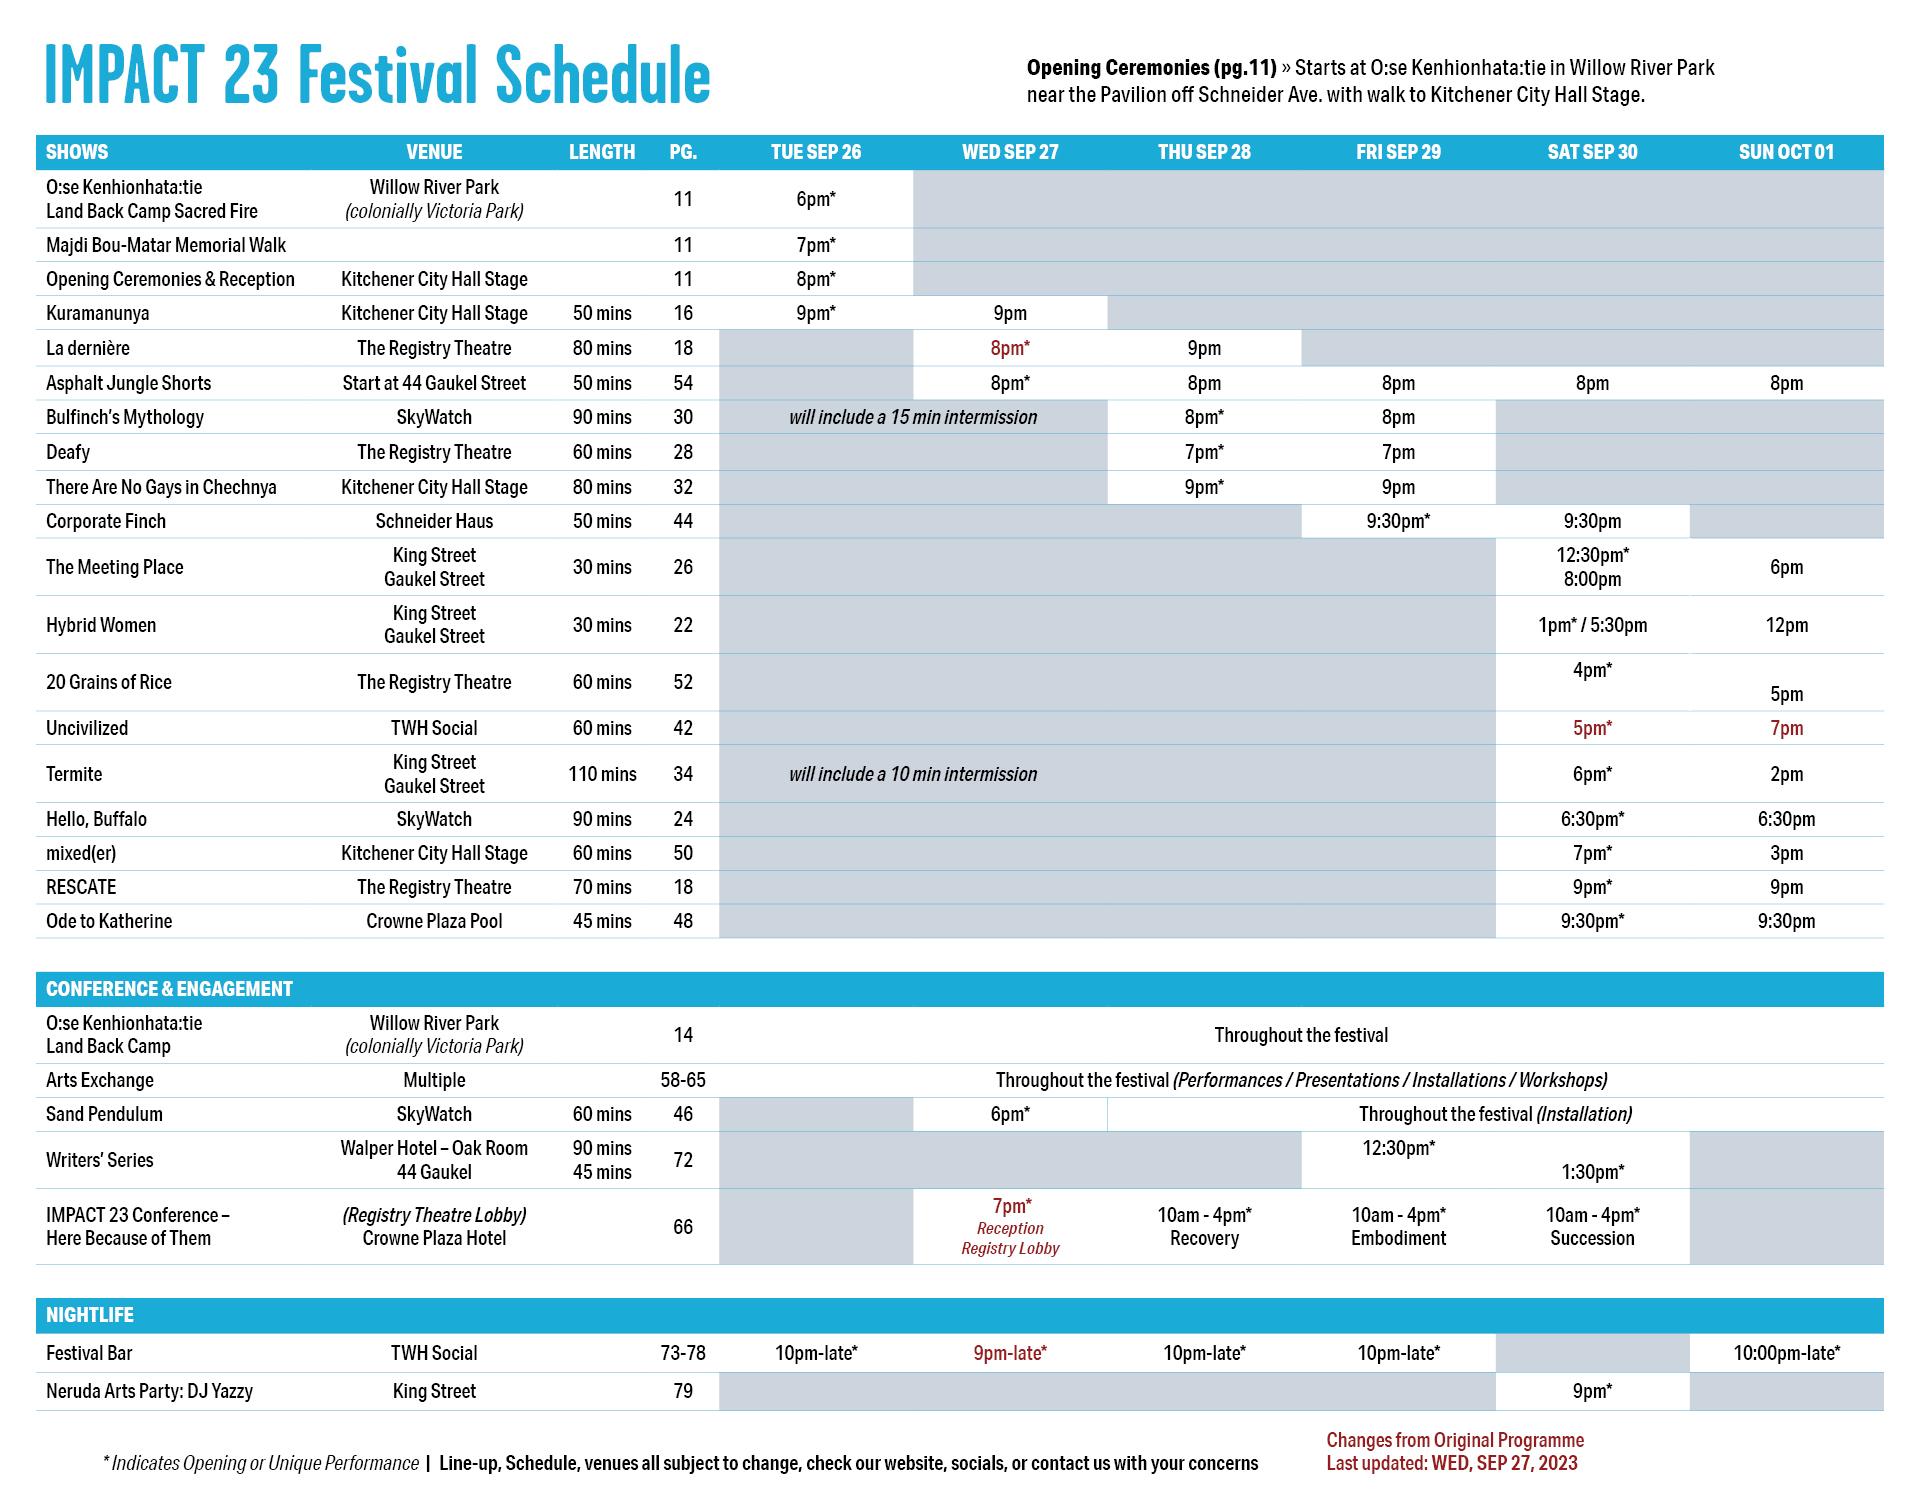 IMPACT 23 Schedule of all major programming.